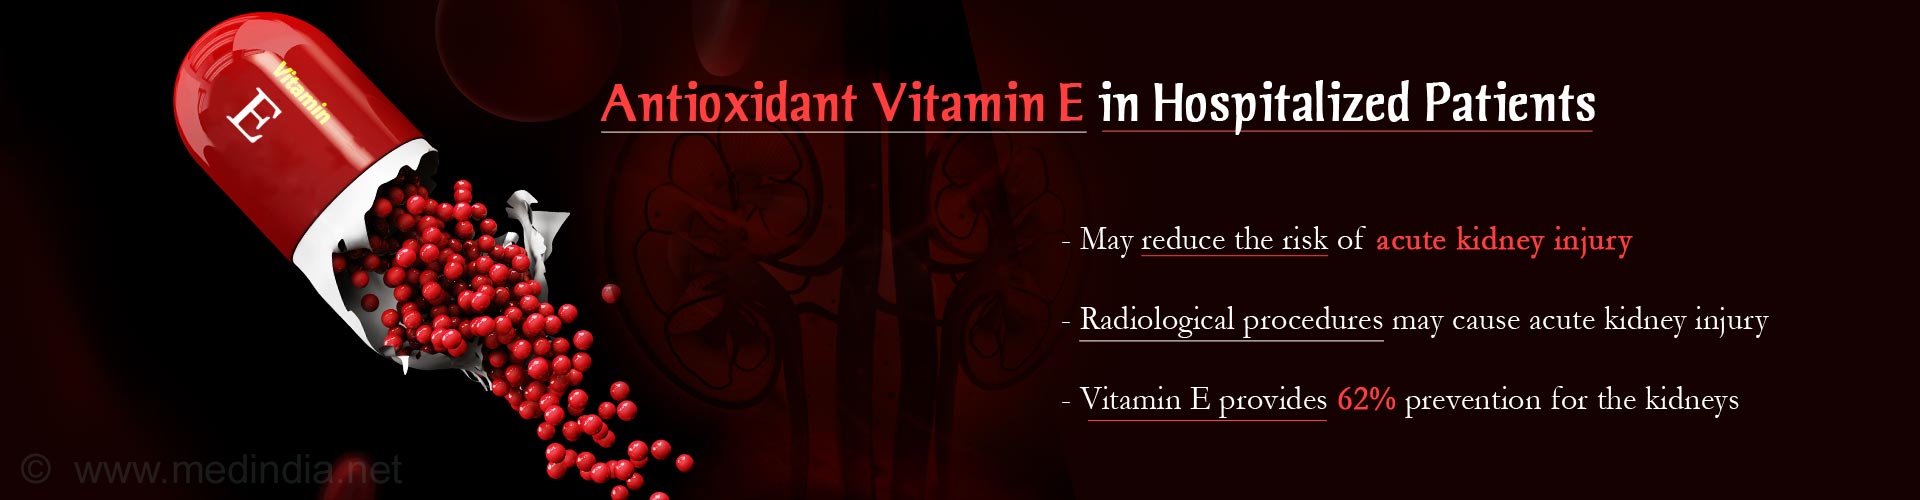 antioxidant vitamin e in hospitalized patients
- may reduce the risk of acute kidney injury
- radiological procedures may cause acute kidney injury
- vitamin e provide 62% prevention for the kidneys